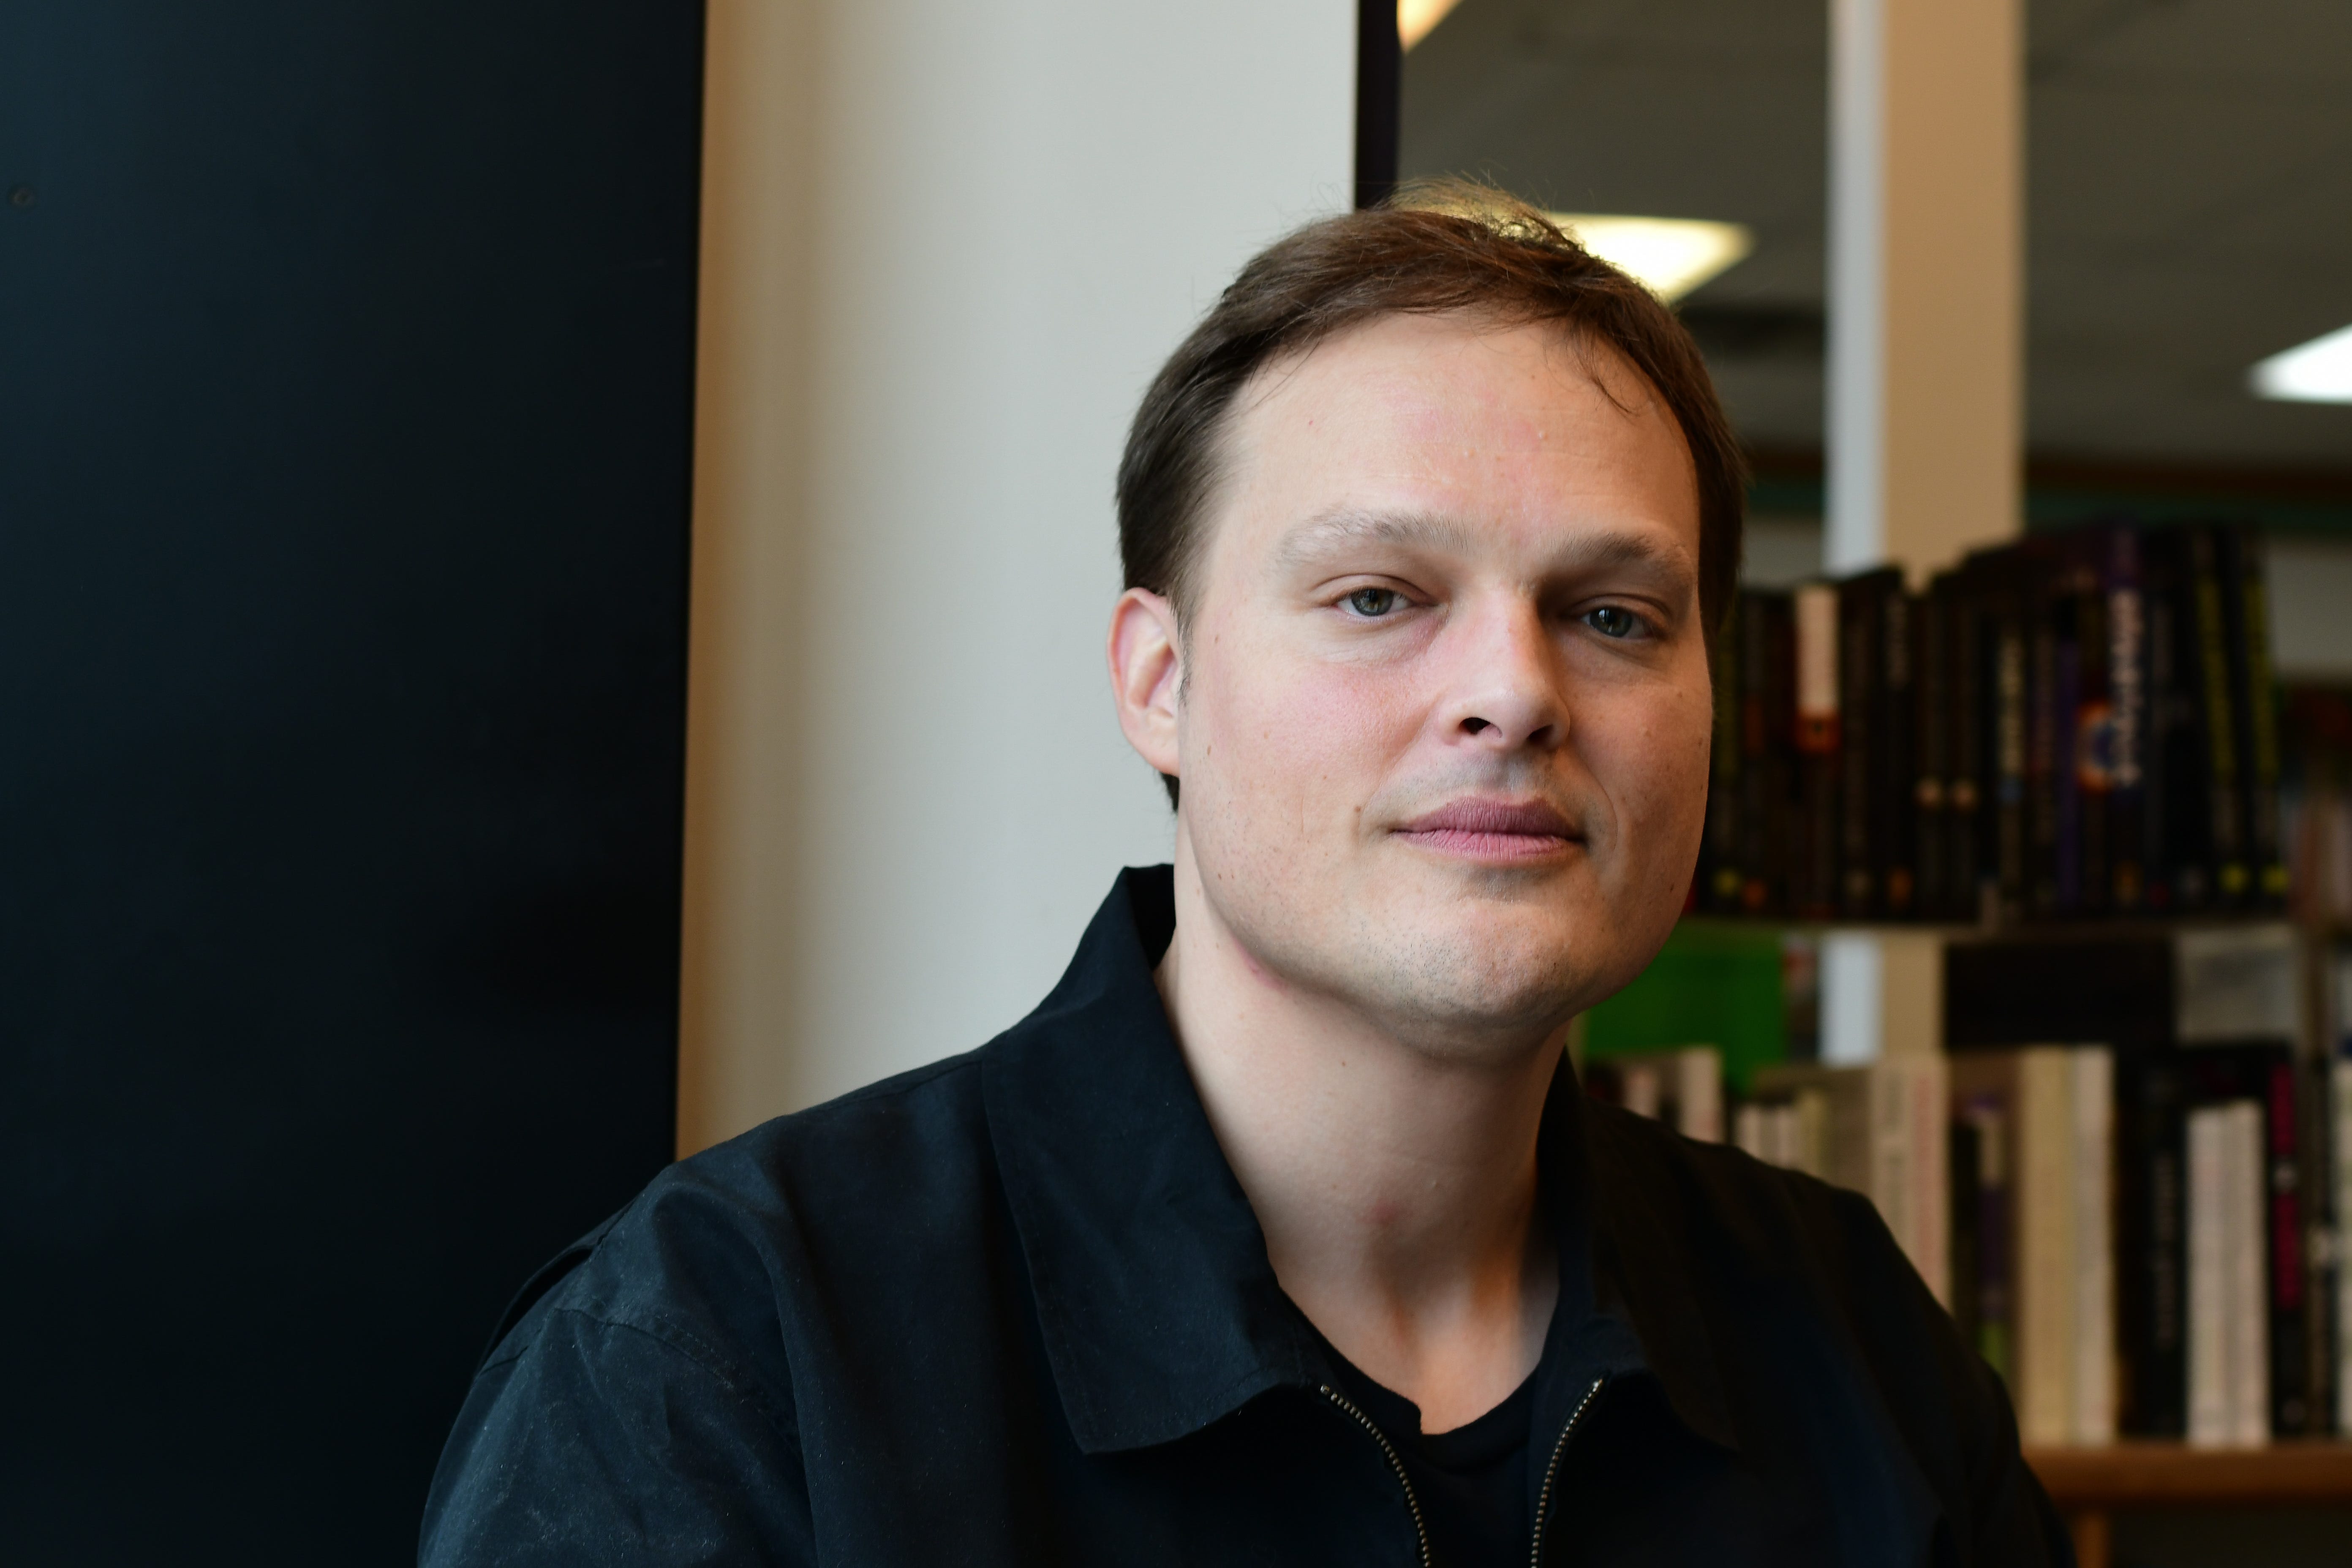 Lost in Translation: What Belongs to You by Garth Greenwell - Electric  Literature